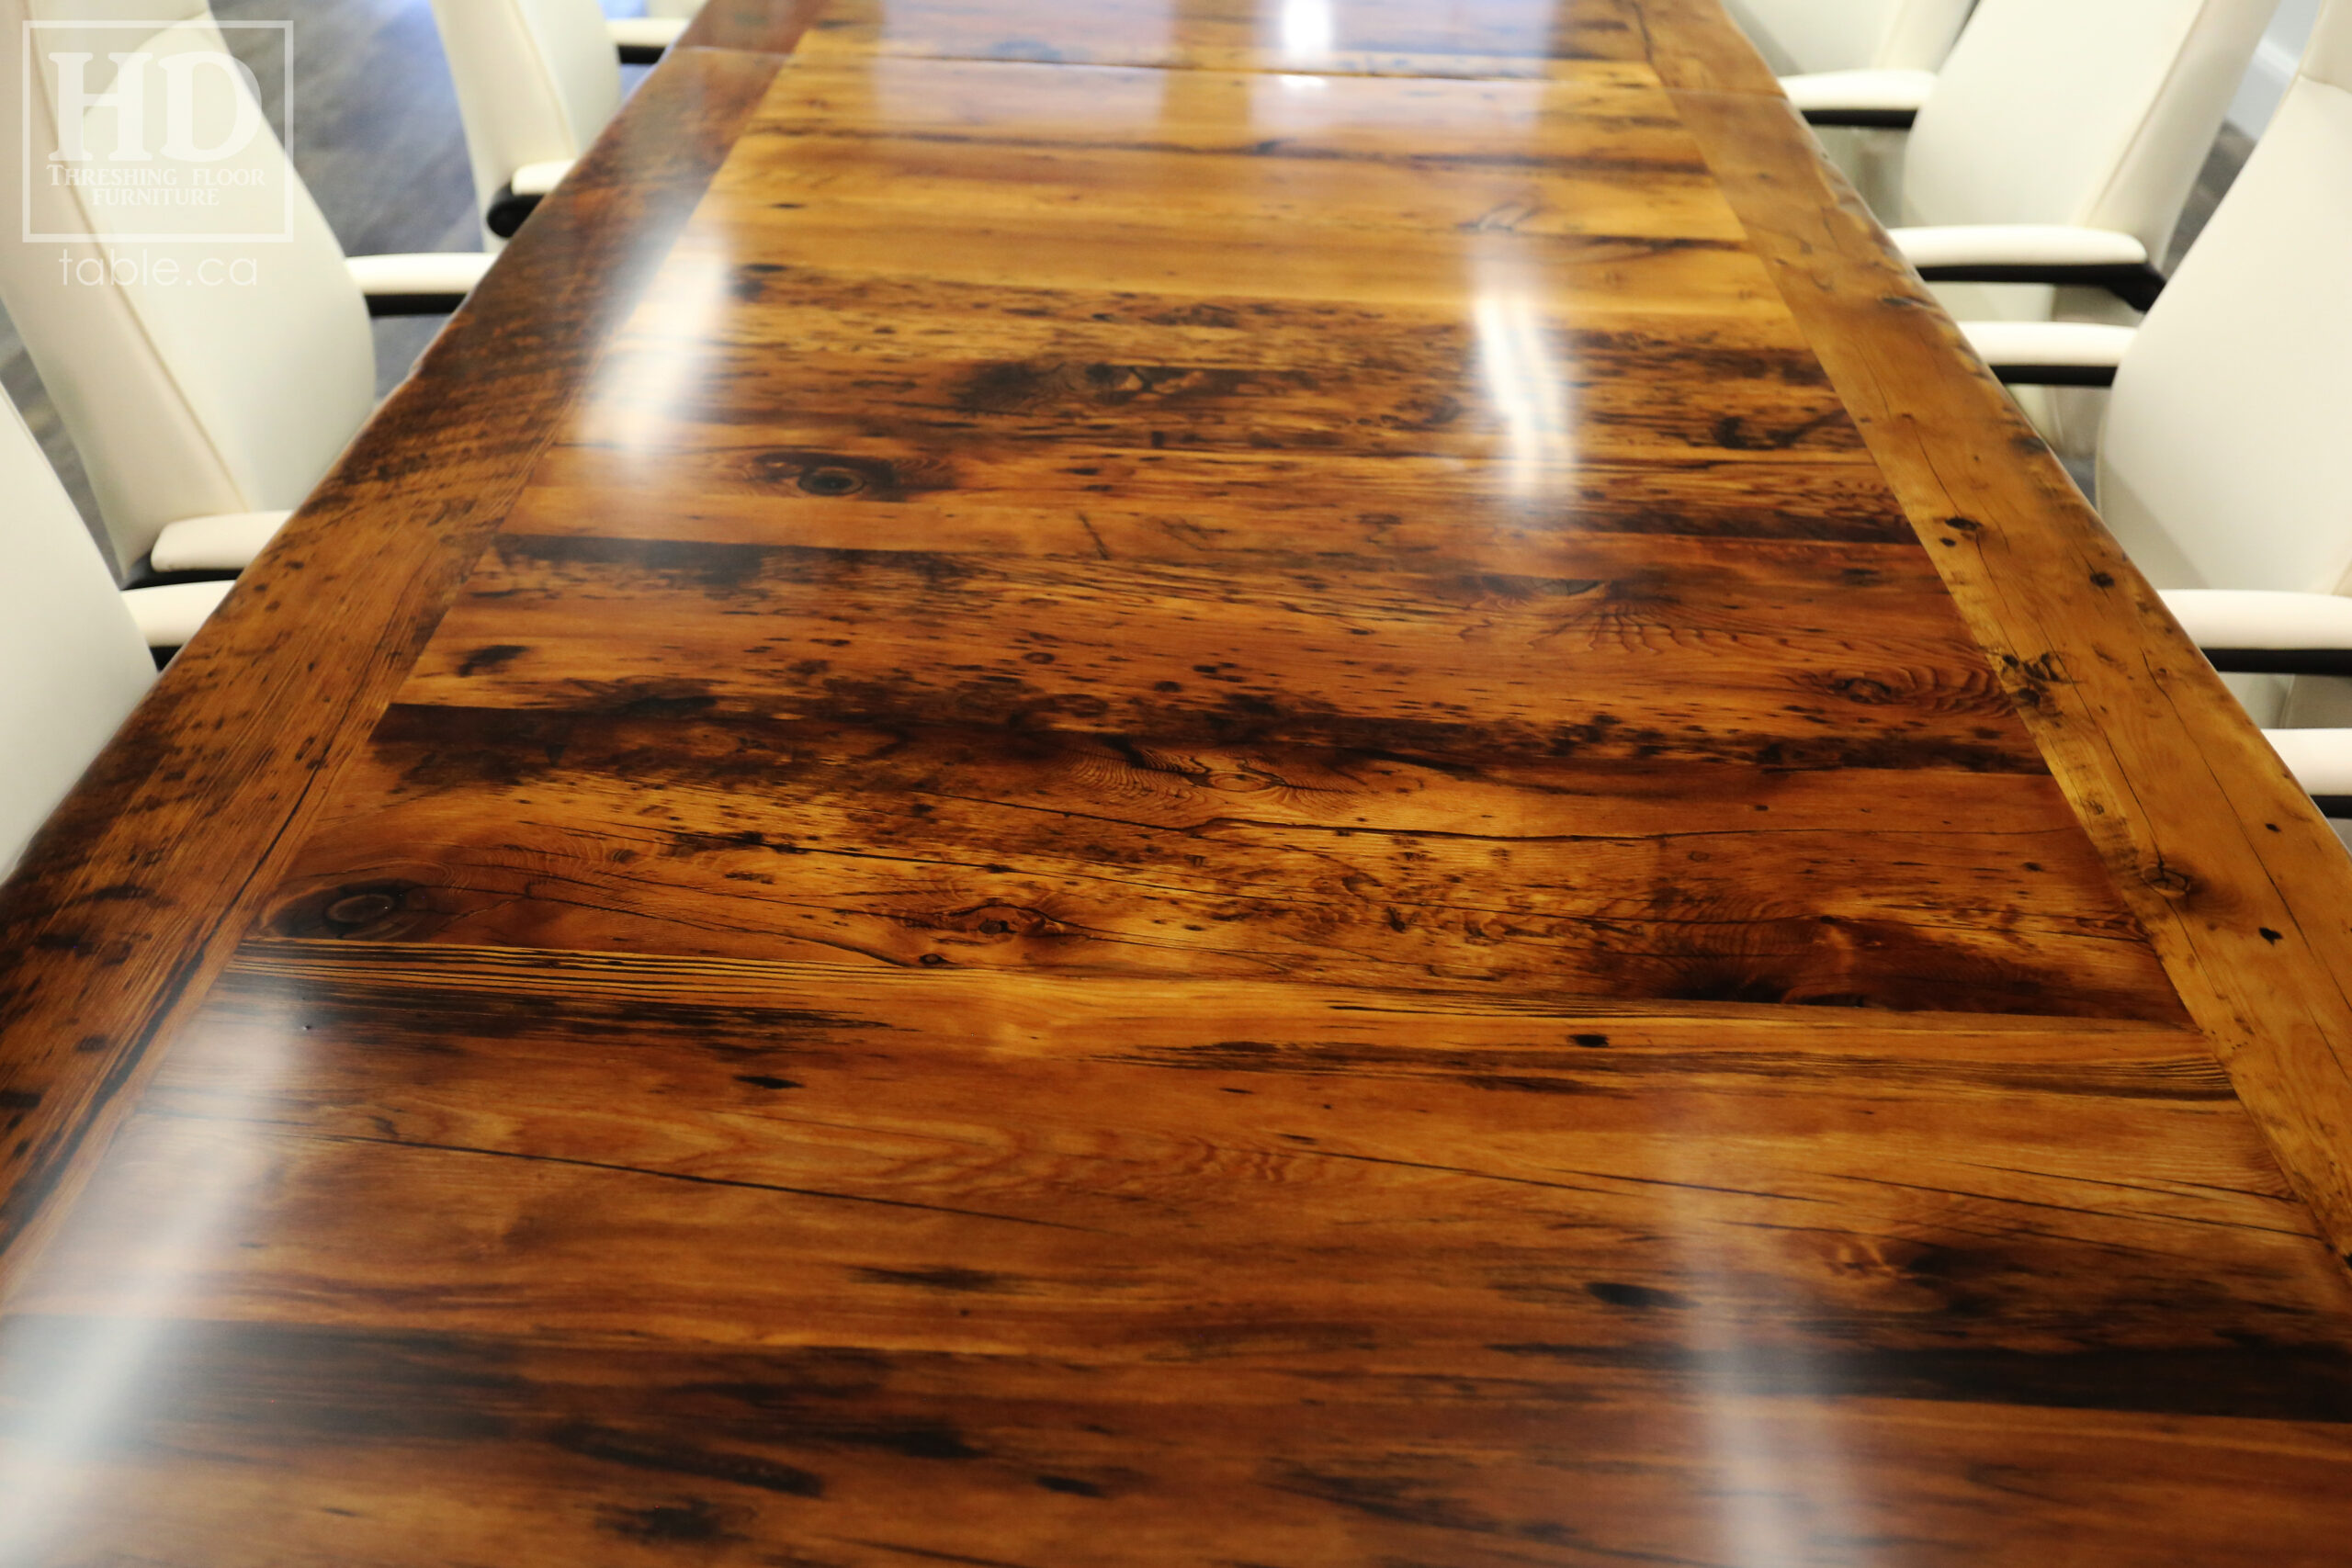 24 Ft Ontario Barnwood Table we made for a Guelph, Ontario company - 48" wide – [3] 8' Sections [on site final doweling] - 3" Joist Plank Posts Base - Reclaimed Hemlock Threshing Floor 2” Top - Original edges & distressing maintained - Premium epoxy + satin polyurethane finish - www.table.ca